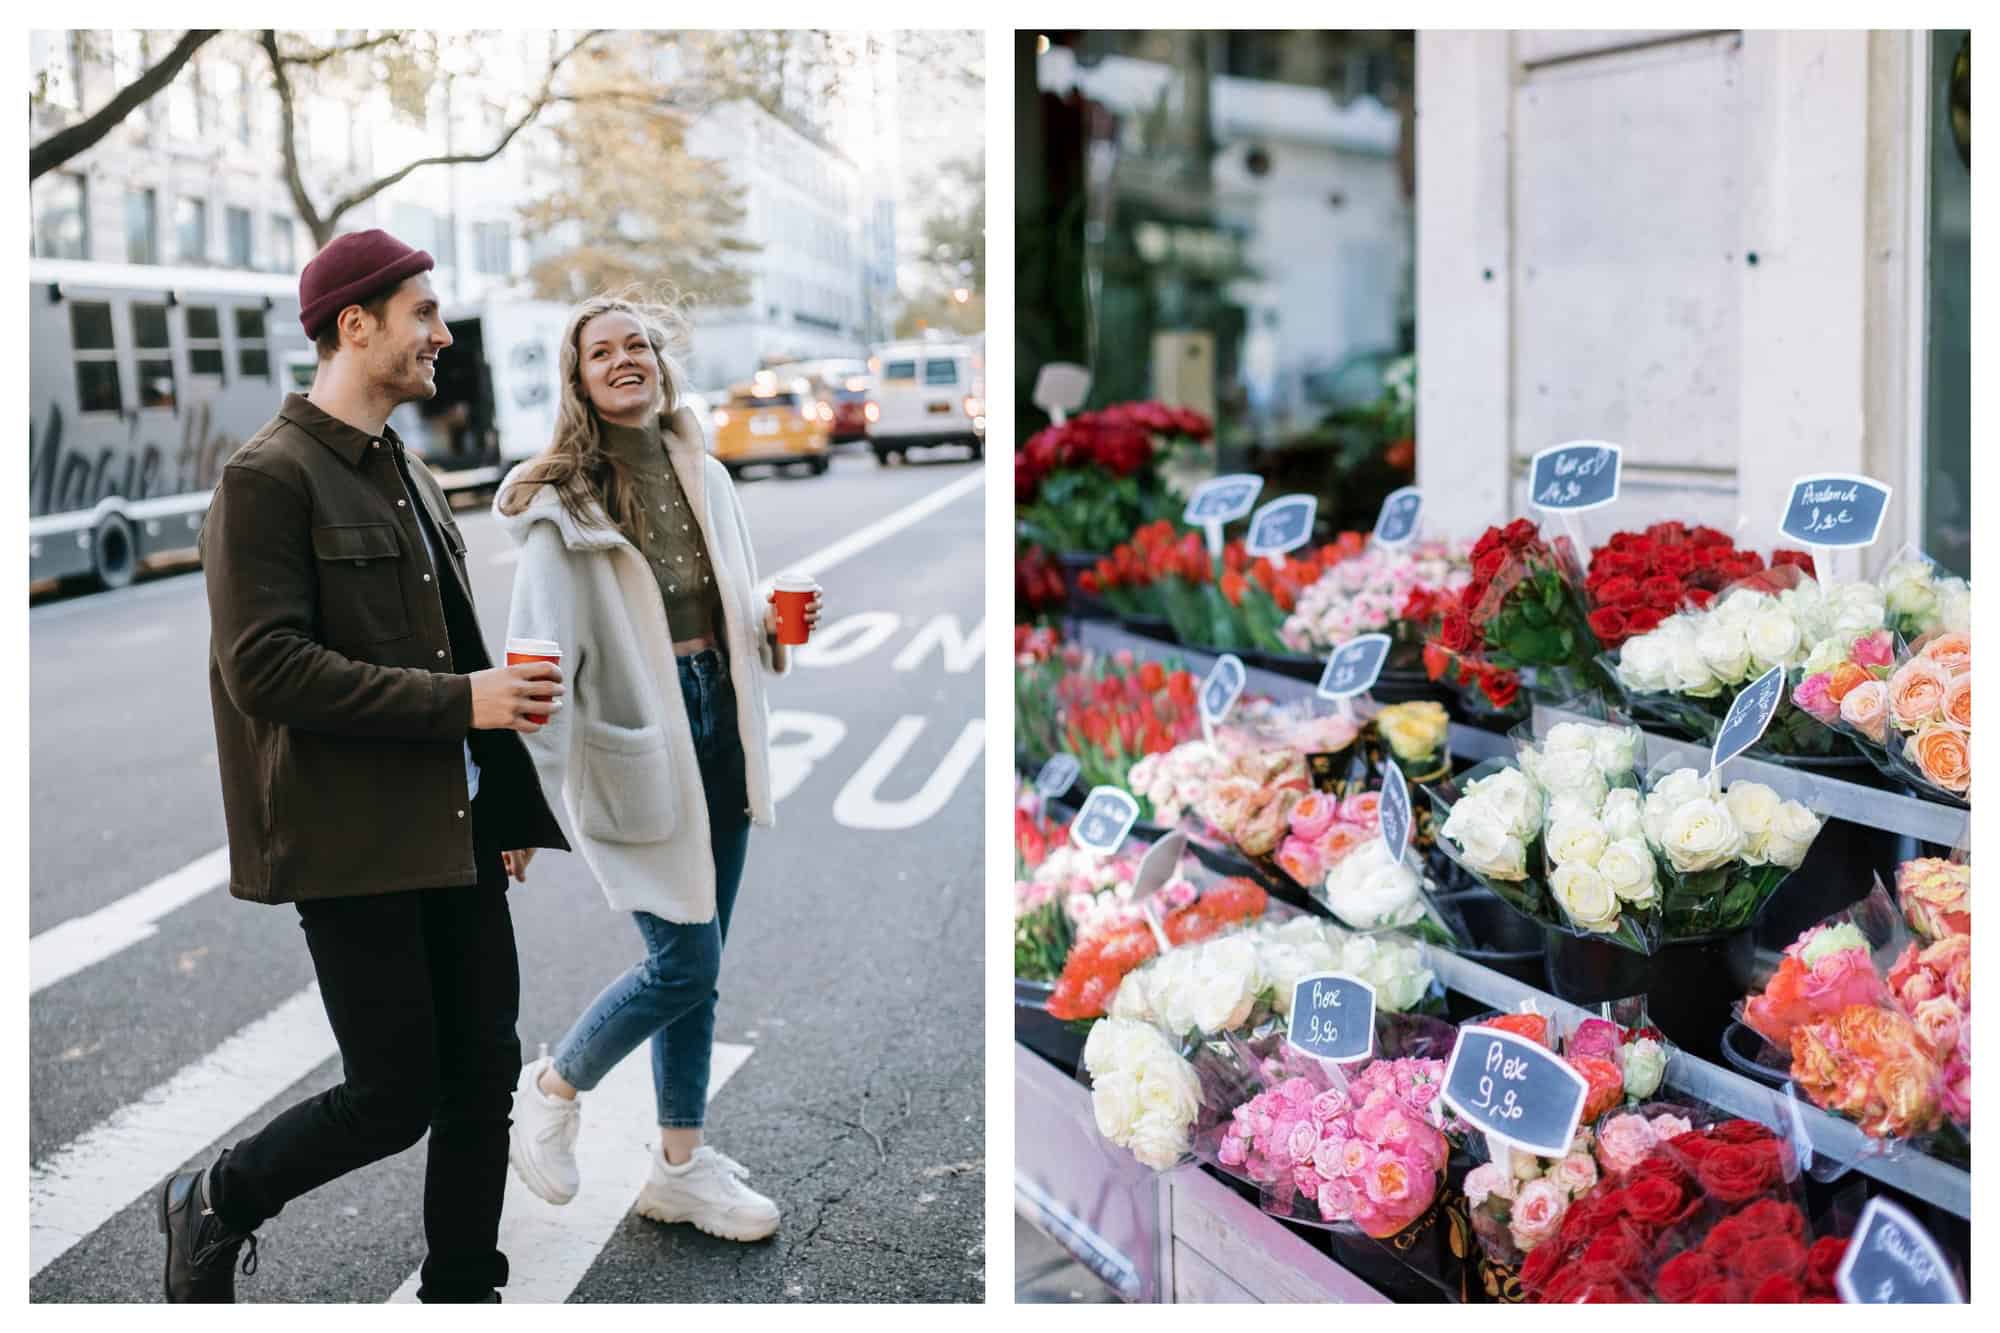 Left: Picture of a couple in winter clothes, holding a cup of take away coffee while crossing a boulevard in Paris with cars in the background. Right: A picture of a flower stand with white, pink, red orange and multi colored roses. 